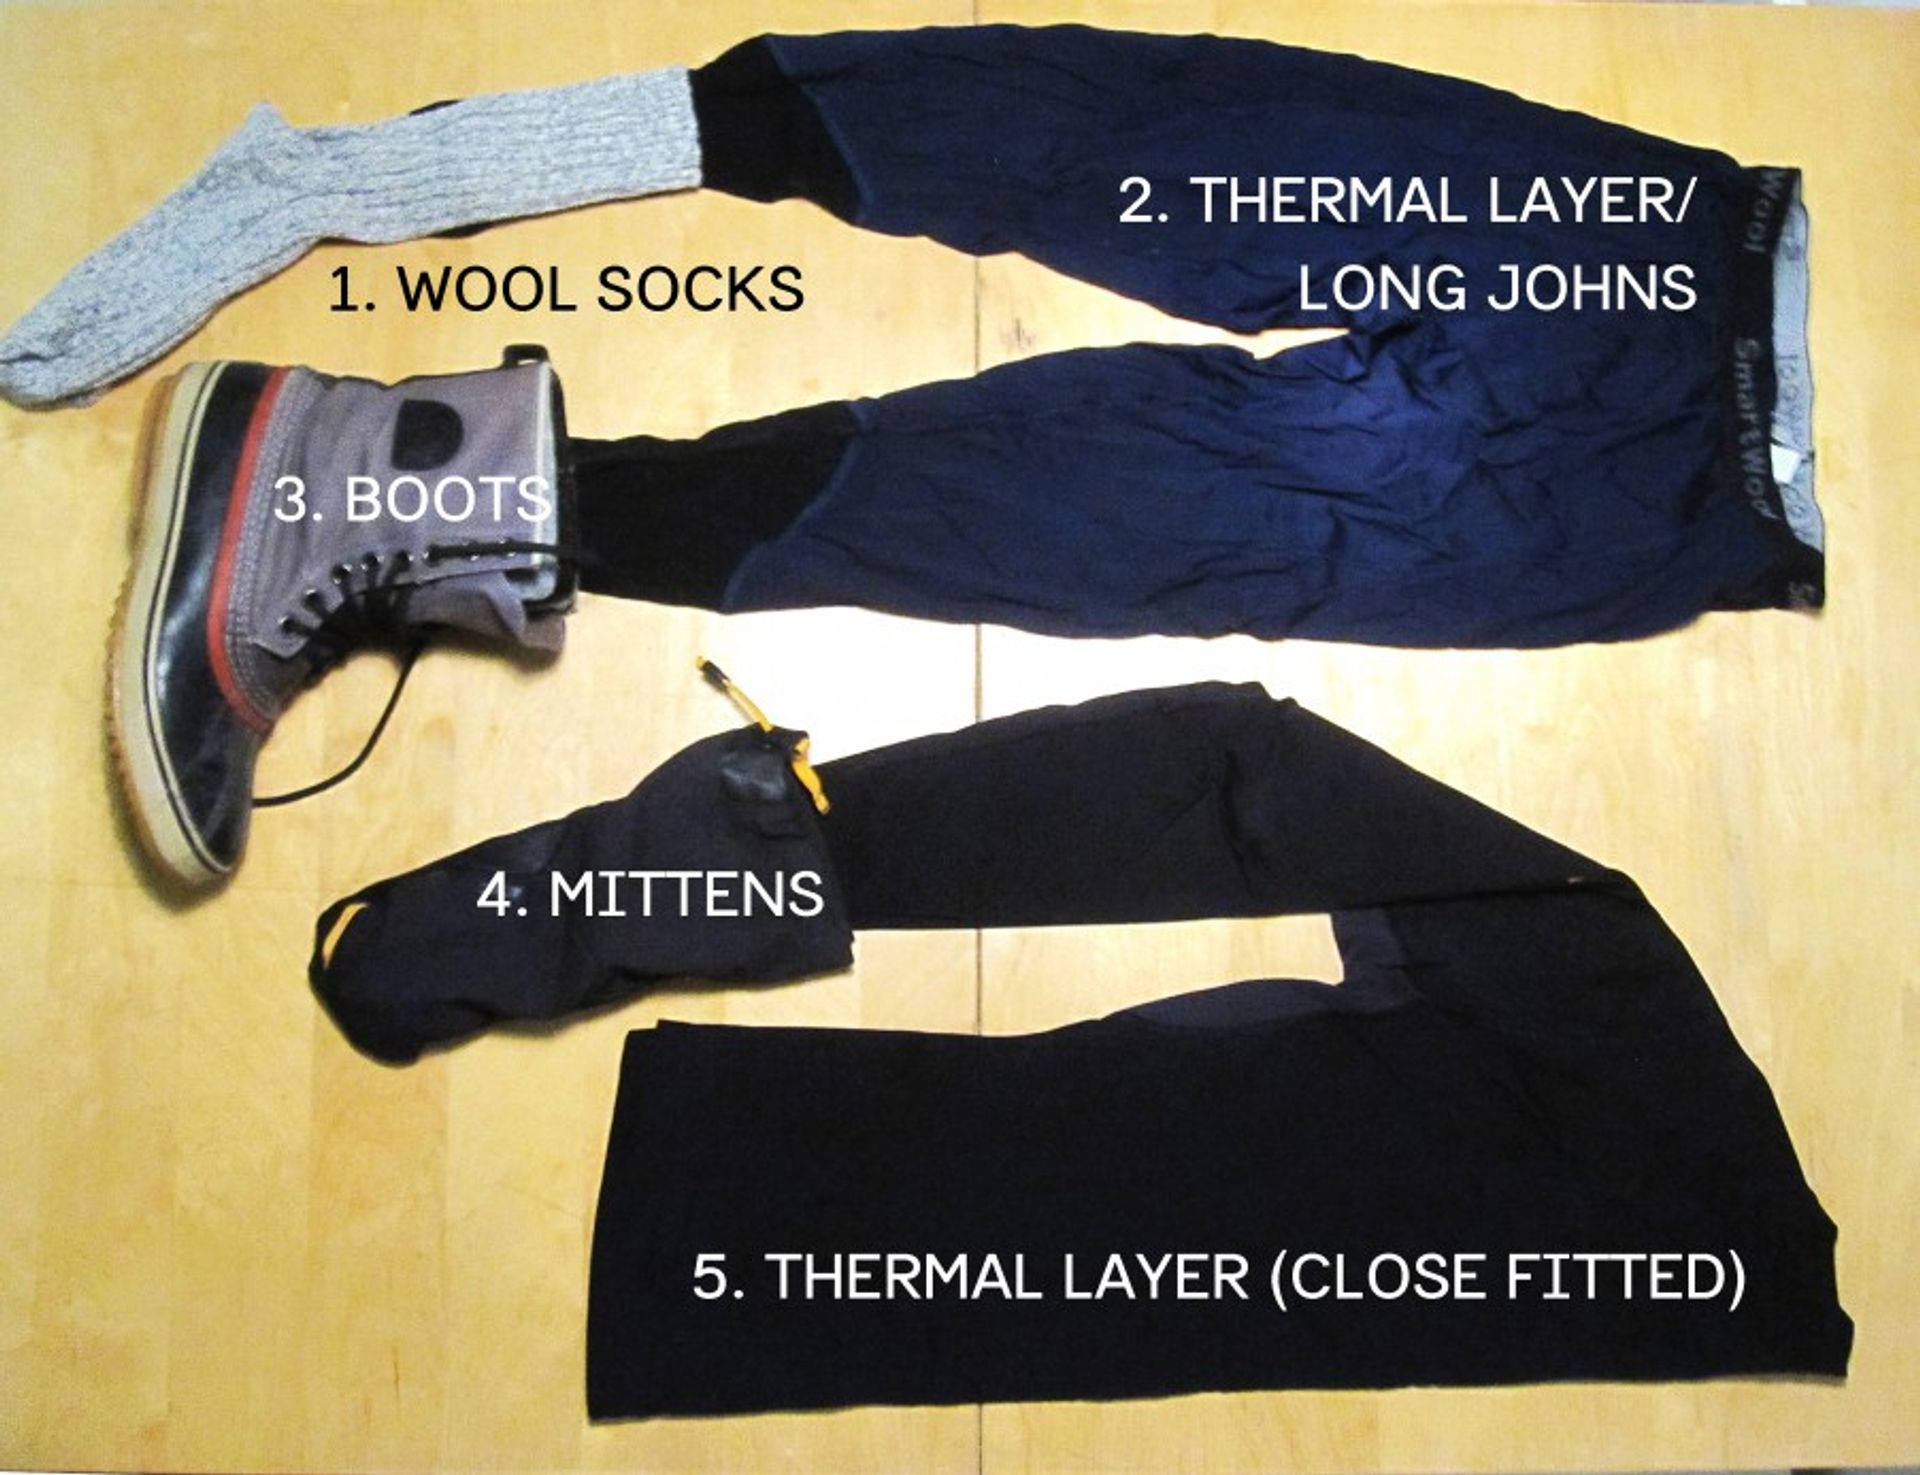 Assortment of clothing including wool socks, mittens and thermal layers.